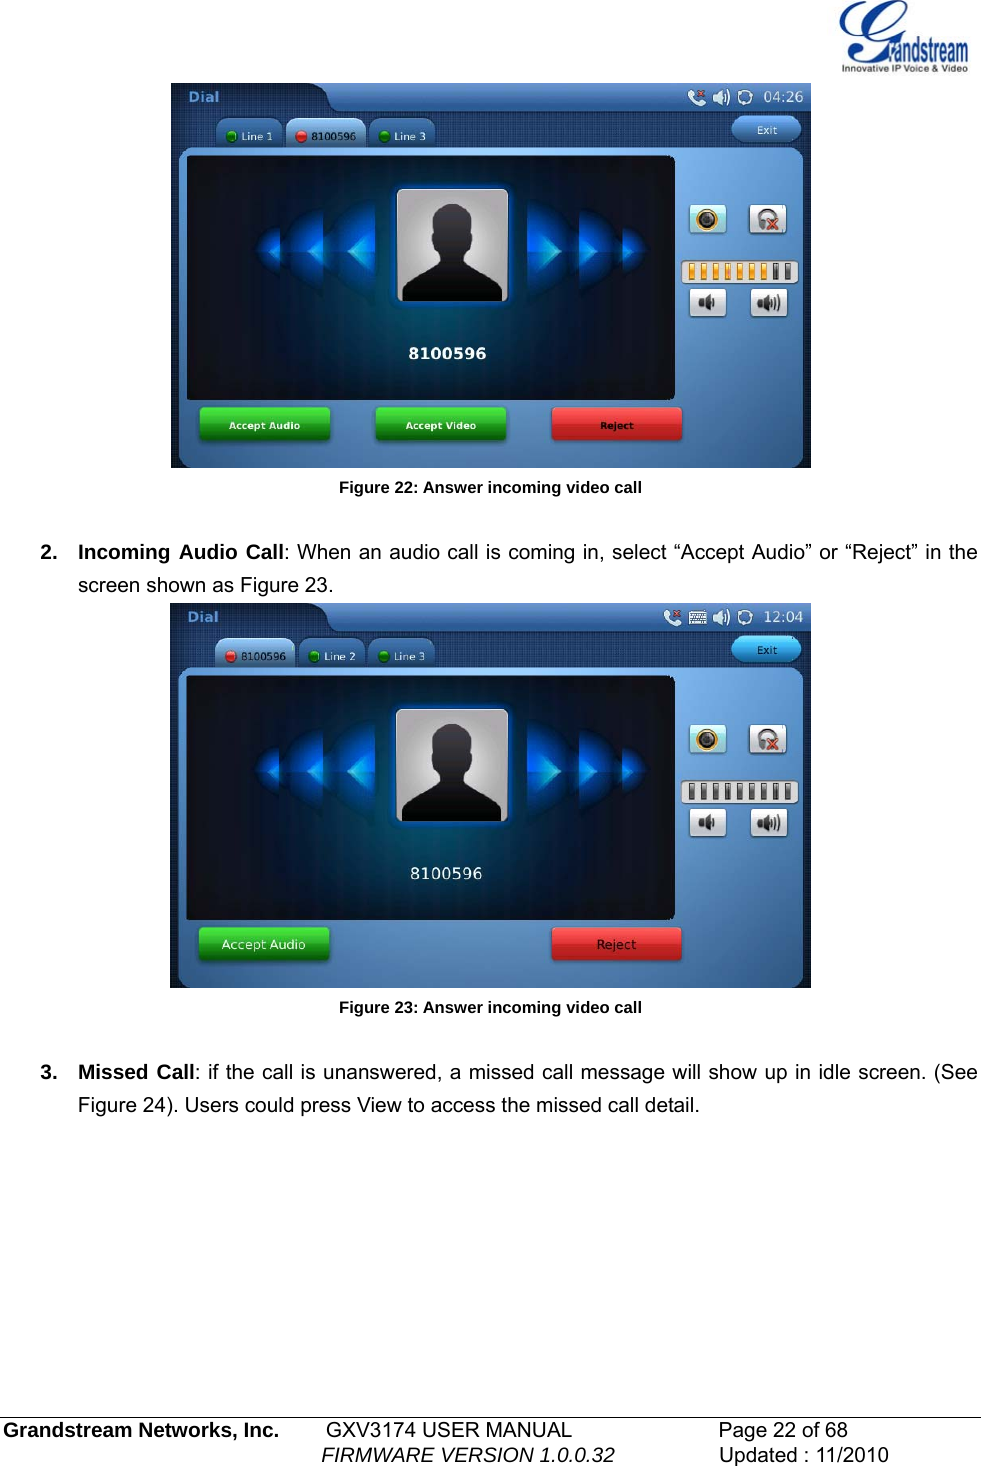    Figure 22: Answer incoming video call  2. Incoming Audio Call: When an audio call is coming in, select “Accept Audio” or “Reject” in the screen shown as Figure 23.   Figure 23: Answer incoming video call  3. Missed Call: if the call is unanswered, a missed call message will show up in idle screen. (See Figure 24). Users could press View to access the missed call detail. Grandstream Networks, Inc.        GXV3174 USER MANUAL                      Page 22 of 68                                                        FIRMWARE VERSION 1.0.0.32                  Updated : 11/2010  